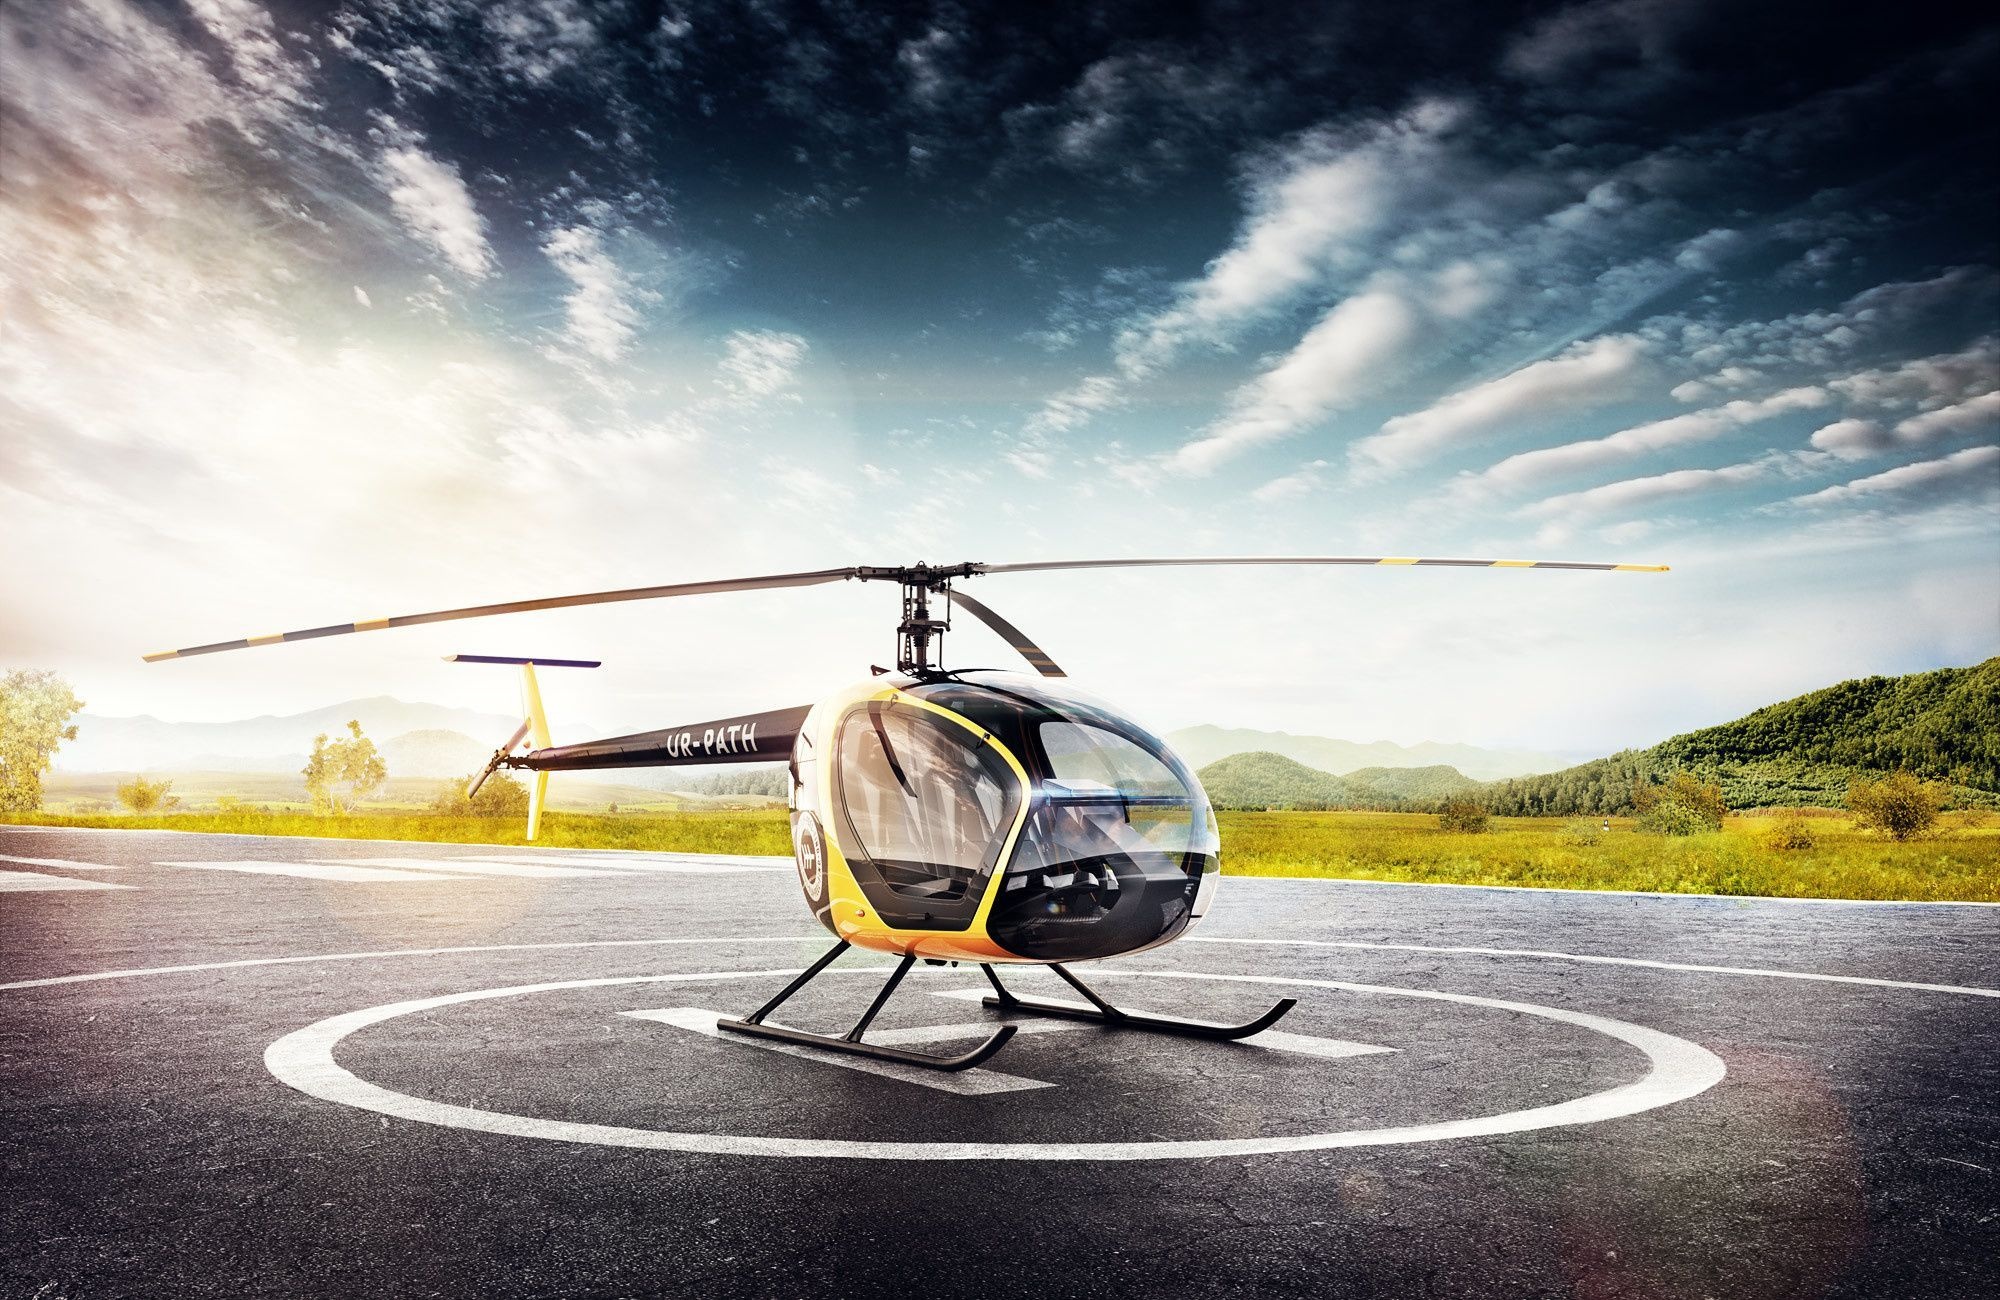 HD Helicopter Wallpapers - Top Free HD Helicopter Backgrounds 2000x1300